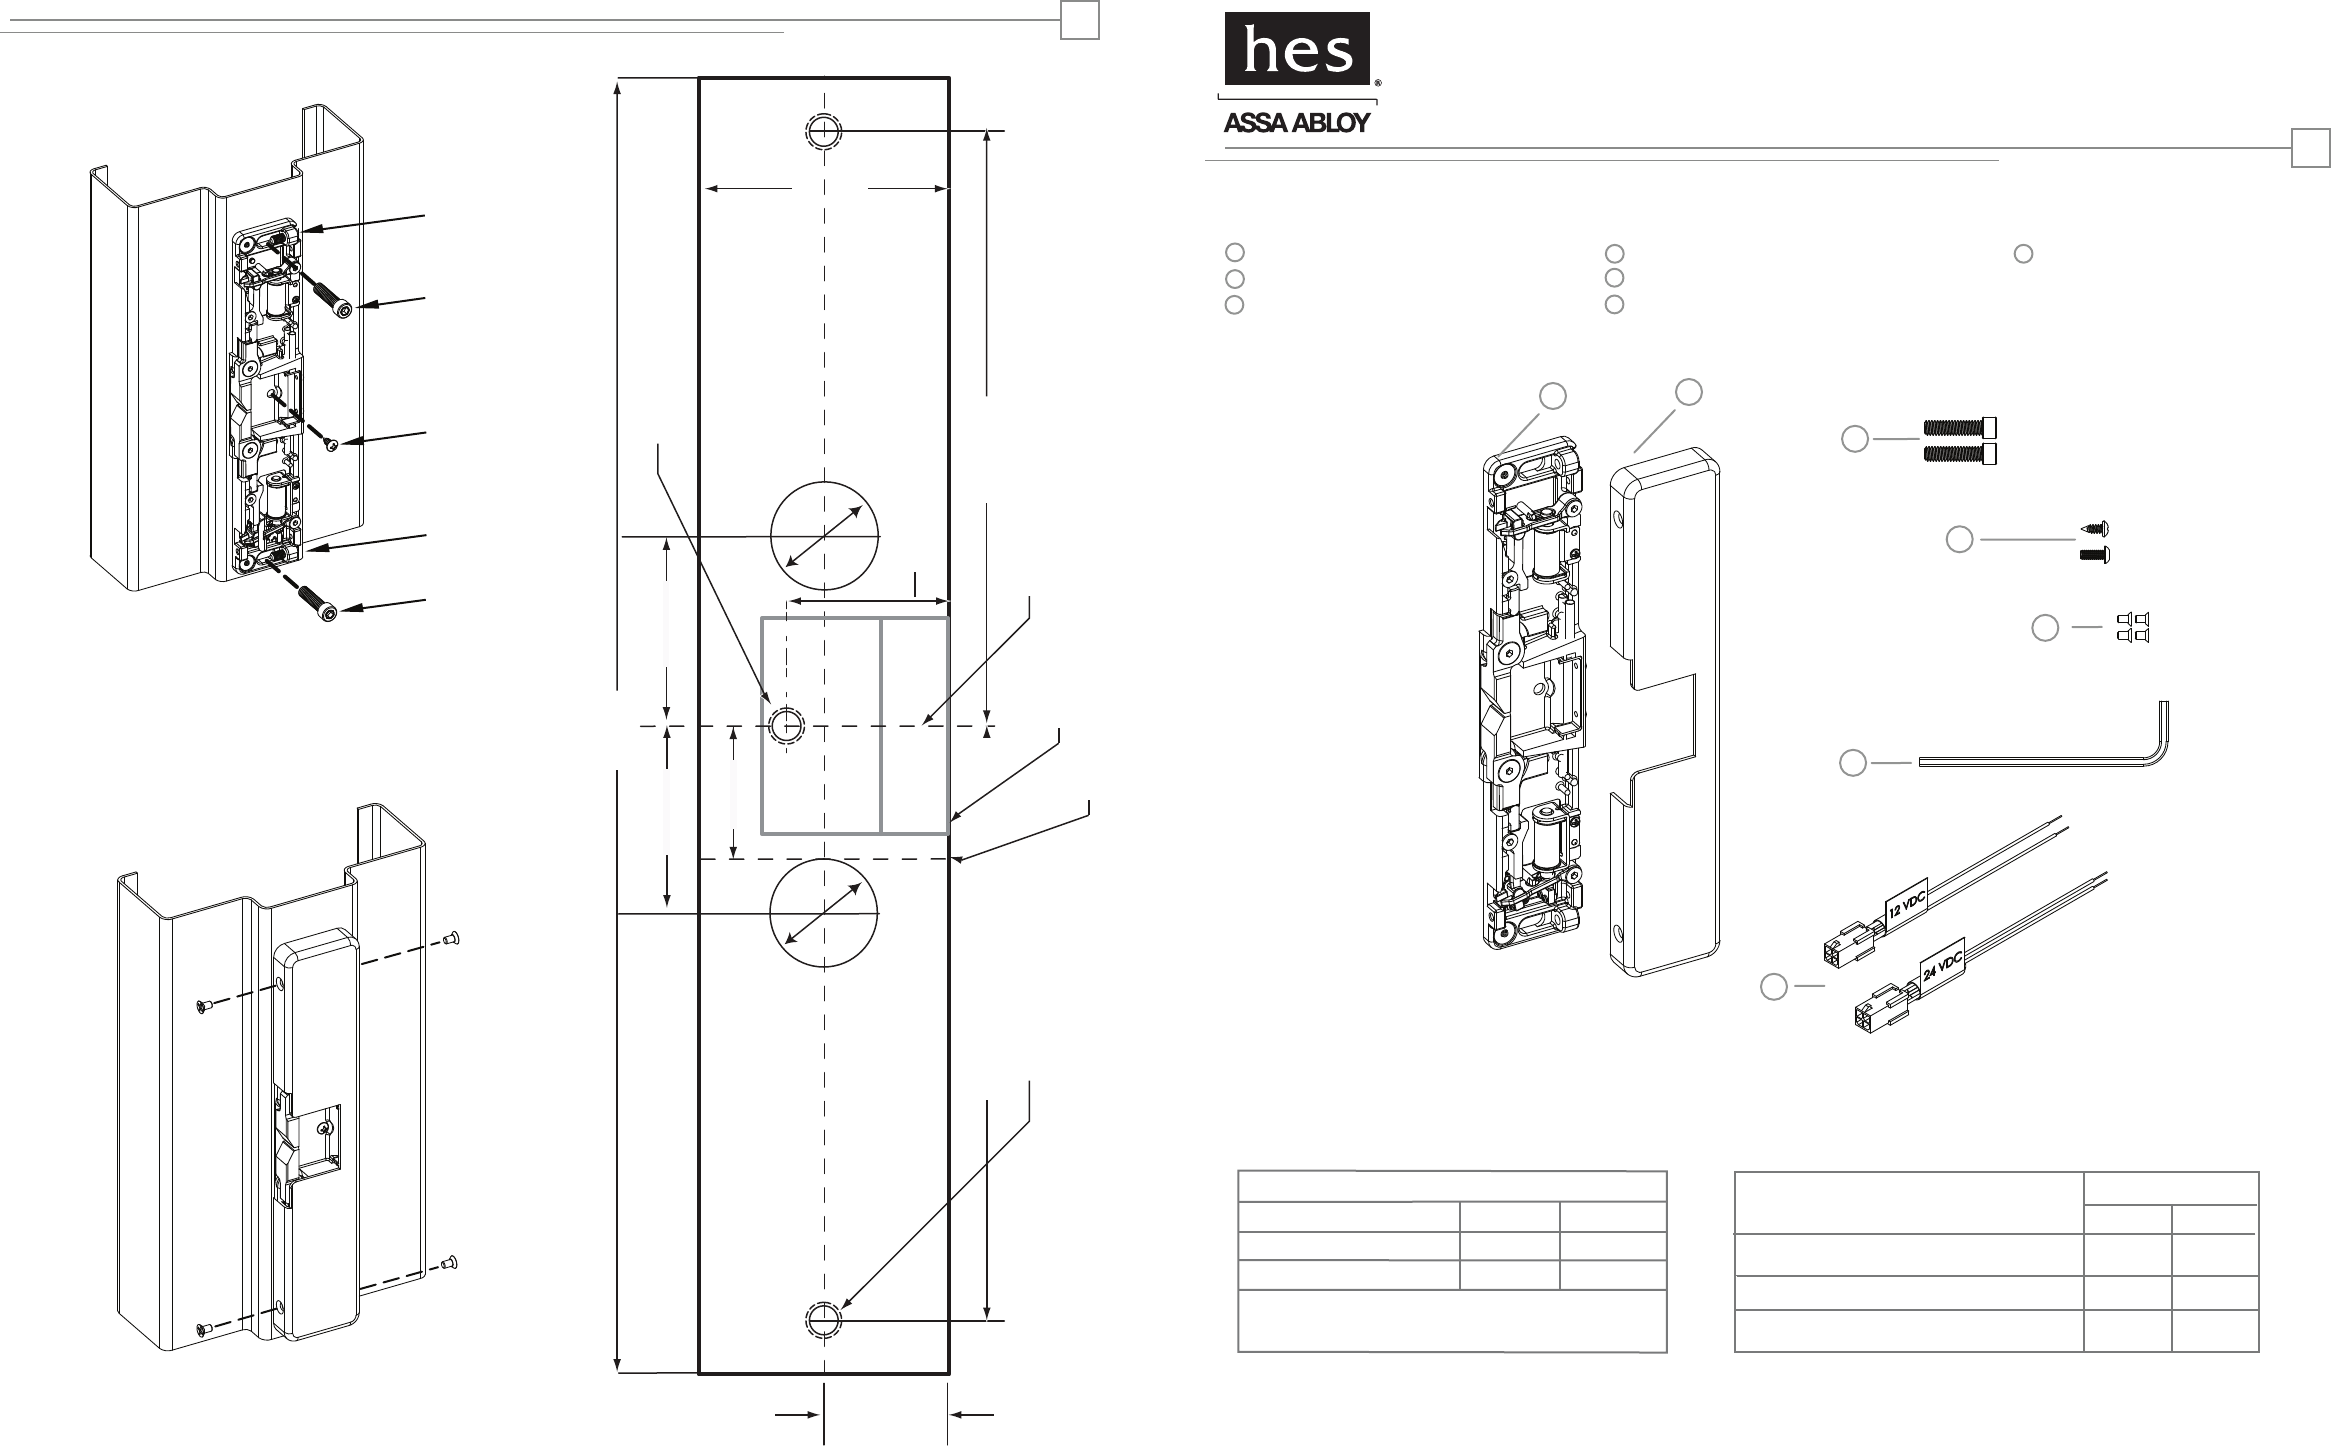 HES 3026006.002, Pages 1 4 Rev B 9400 Series Installation Guide 